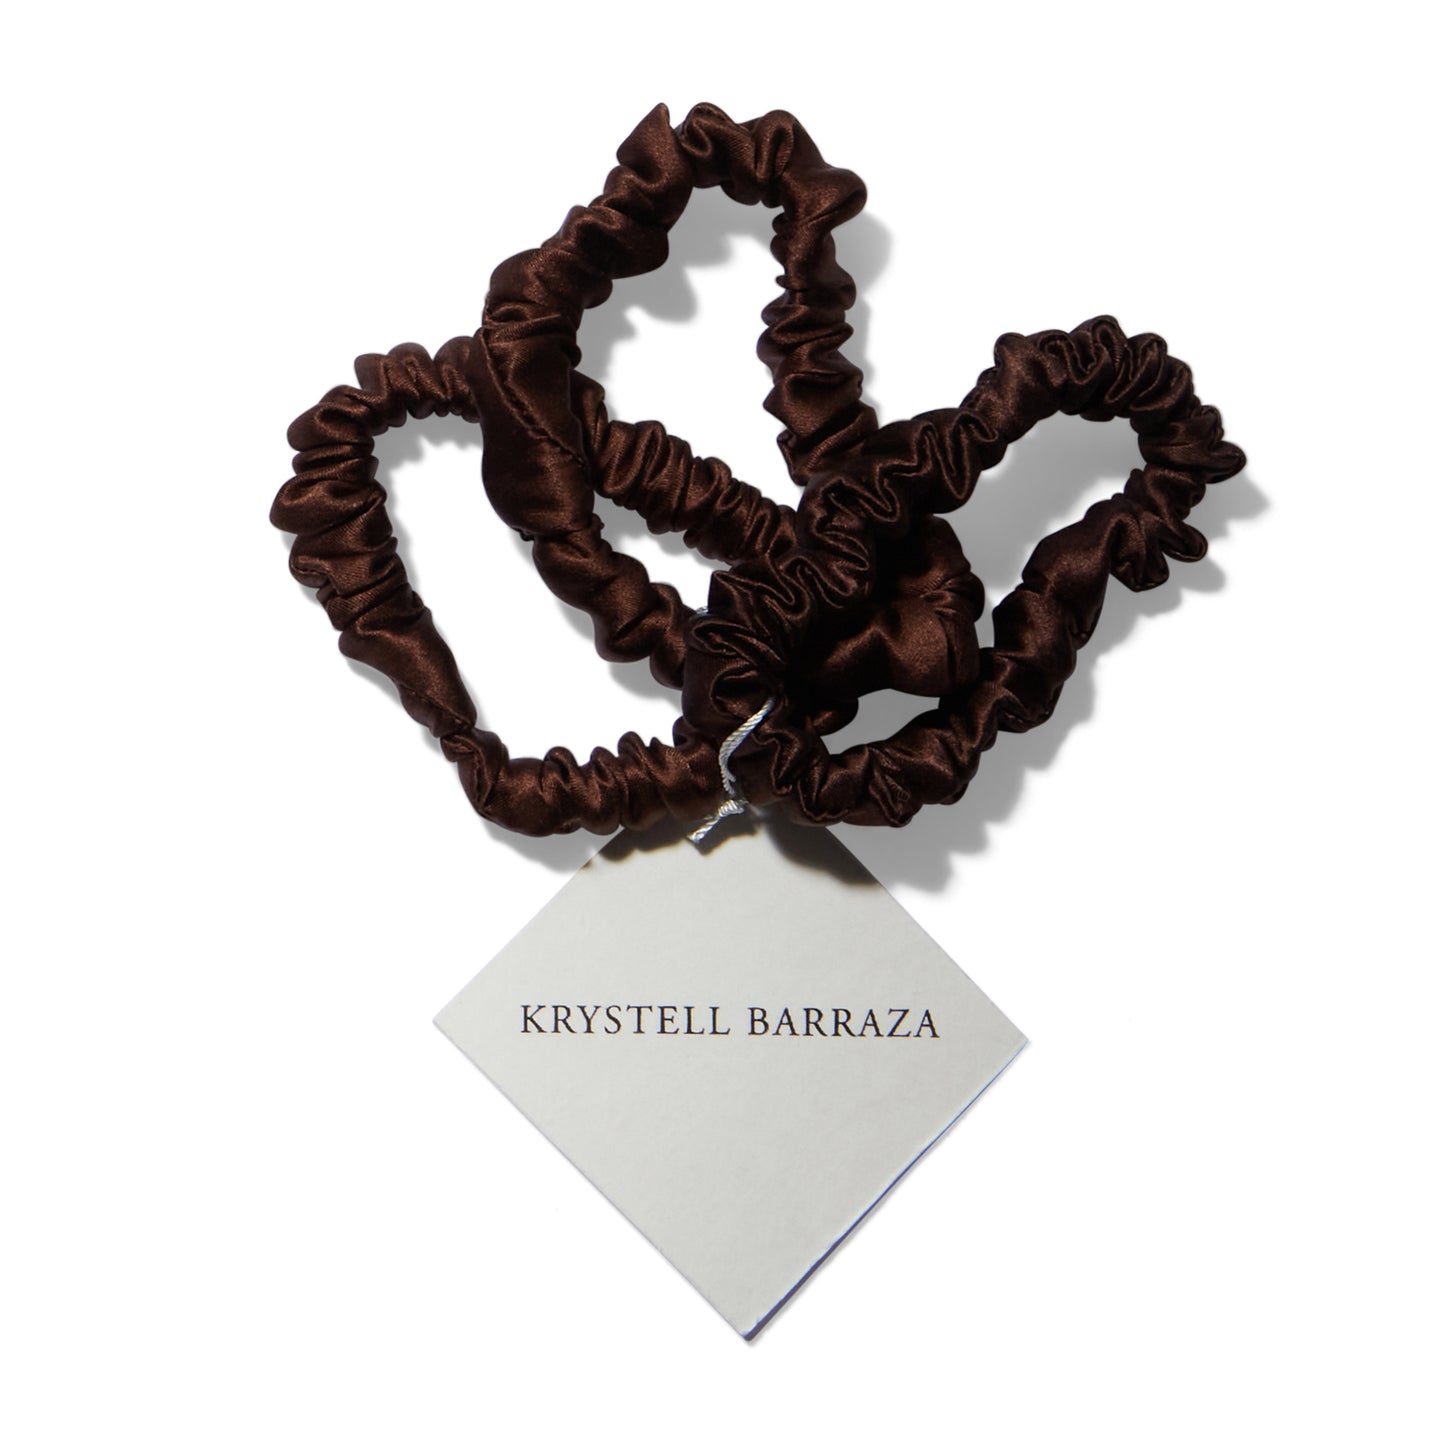 Three 6 Krystell Barraza silk hair ties in Cocoa with the logo tag attached. 